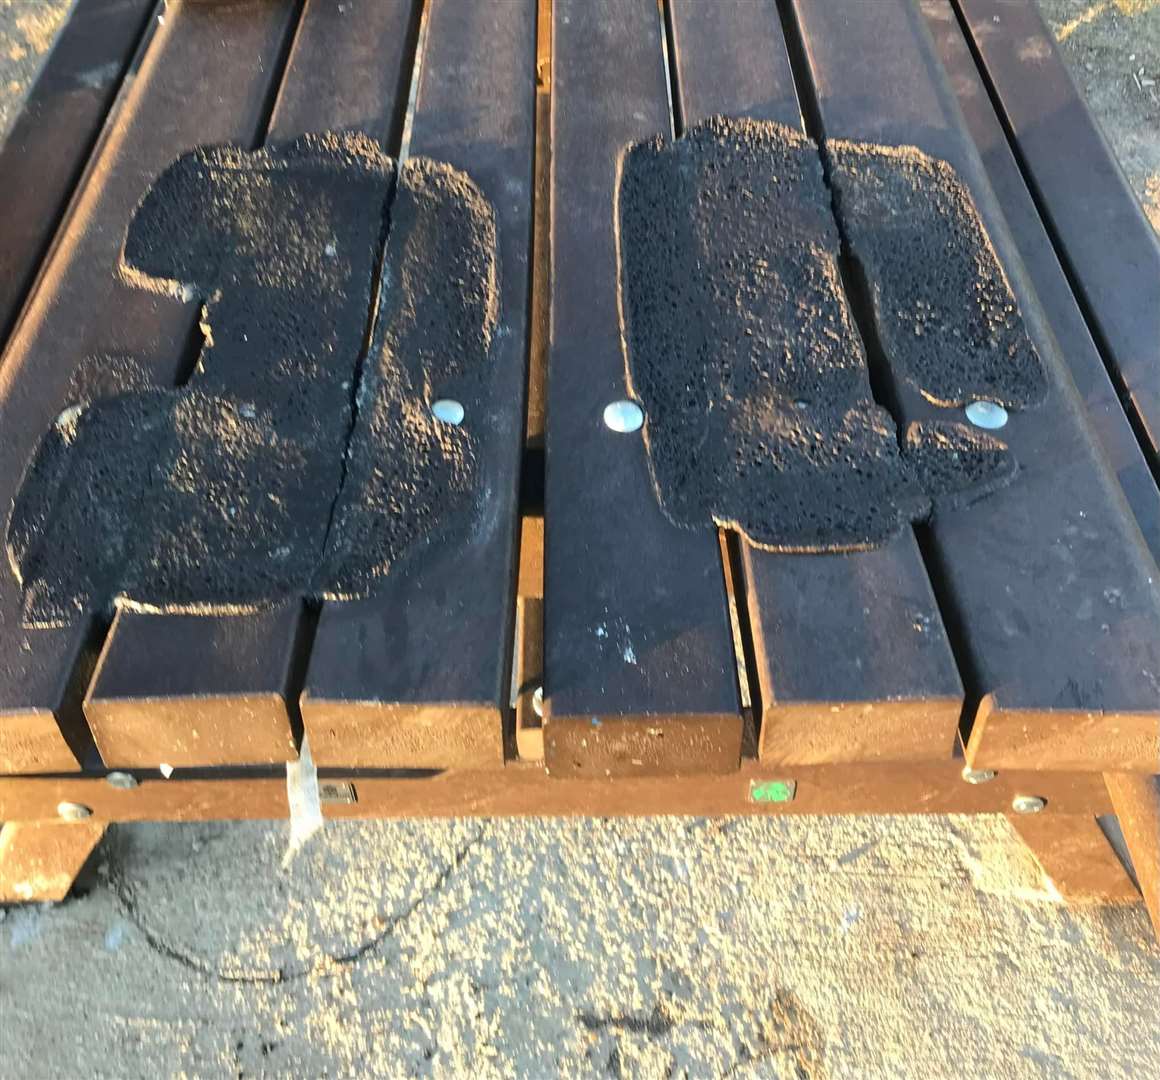 The damaged bench